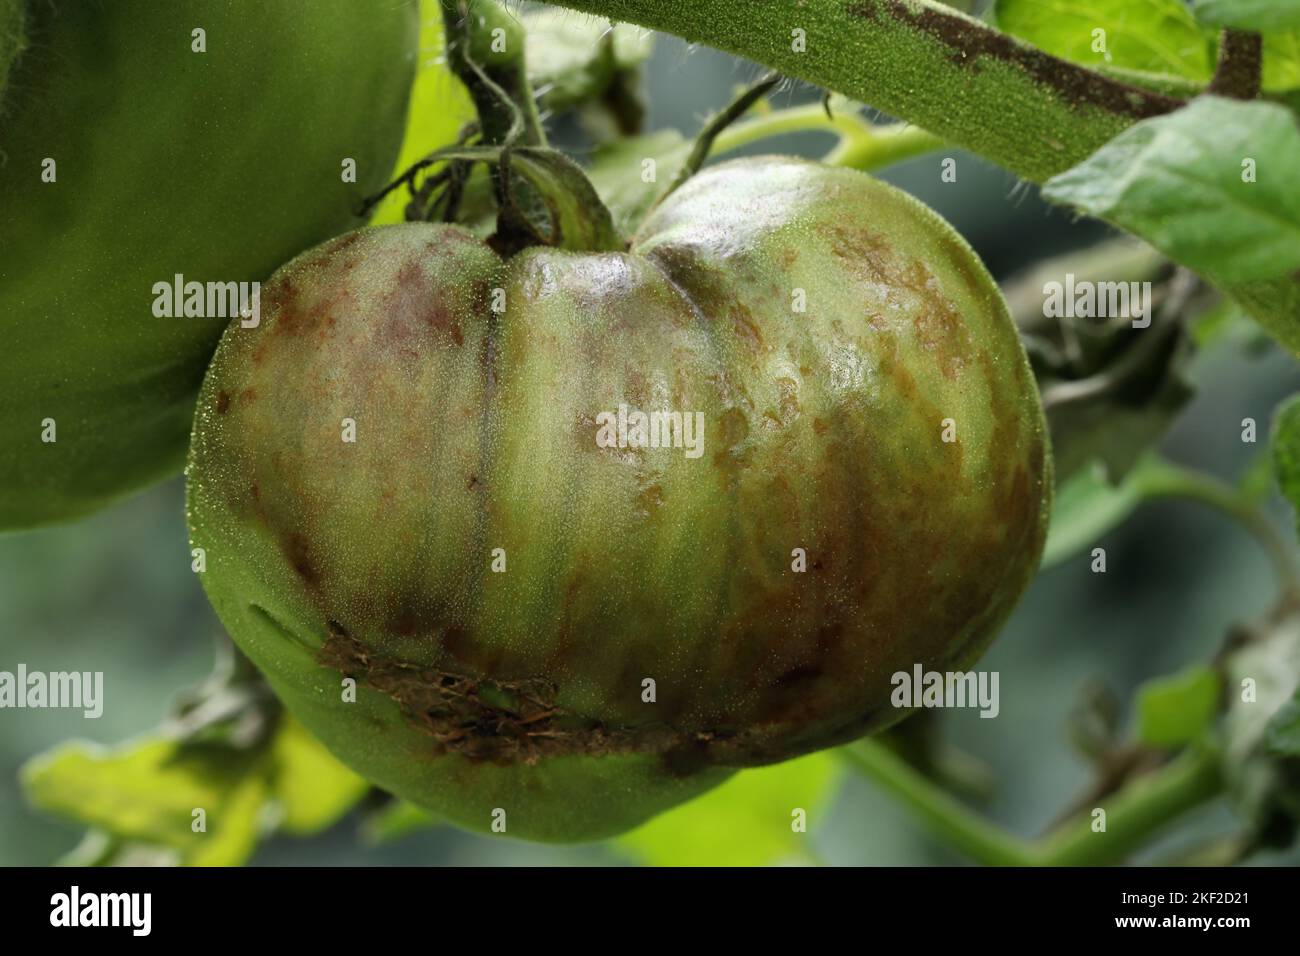 The tomato plant and unripe tomato are infected with late blight caused by fungus-like microorganism Phytophthora infestans. Stock Photo